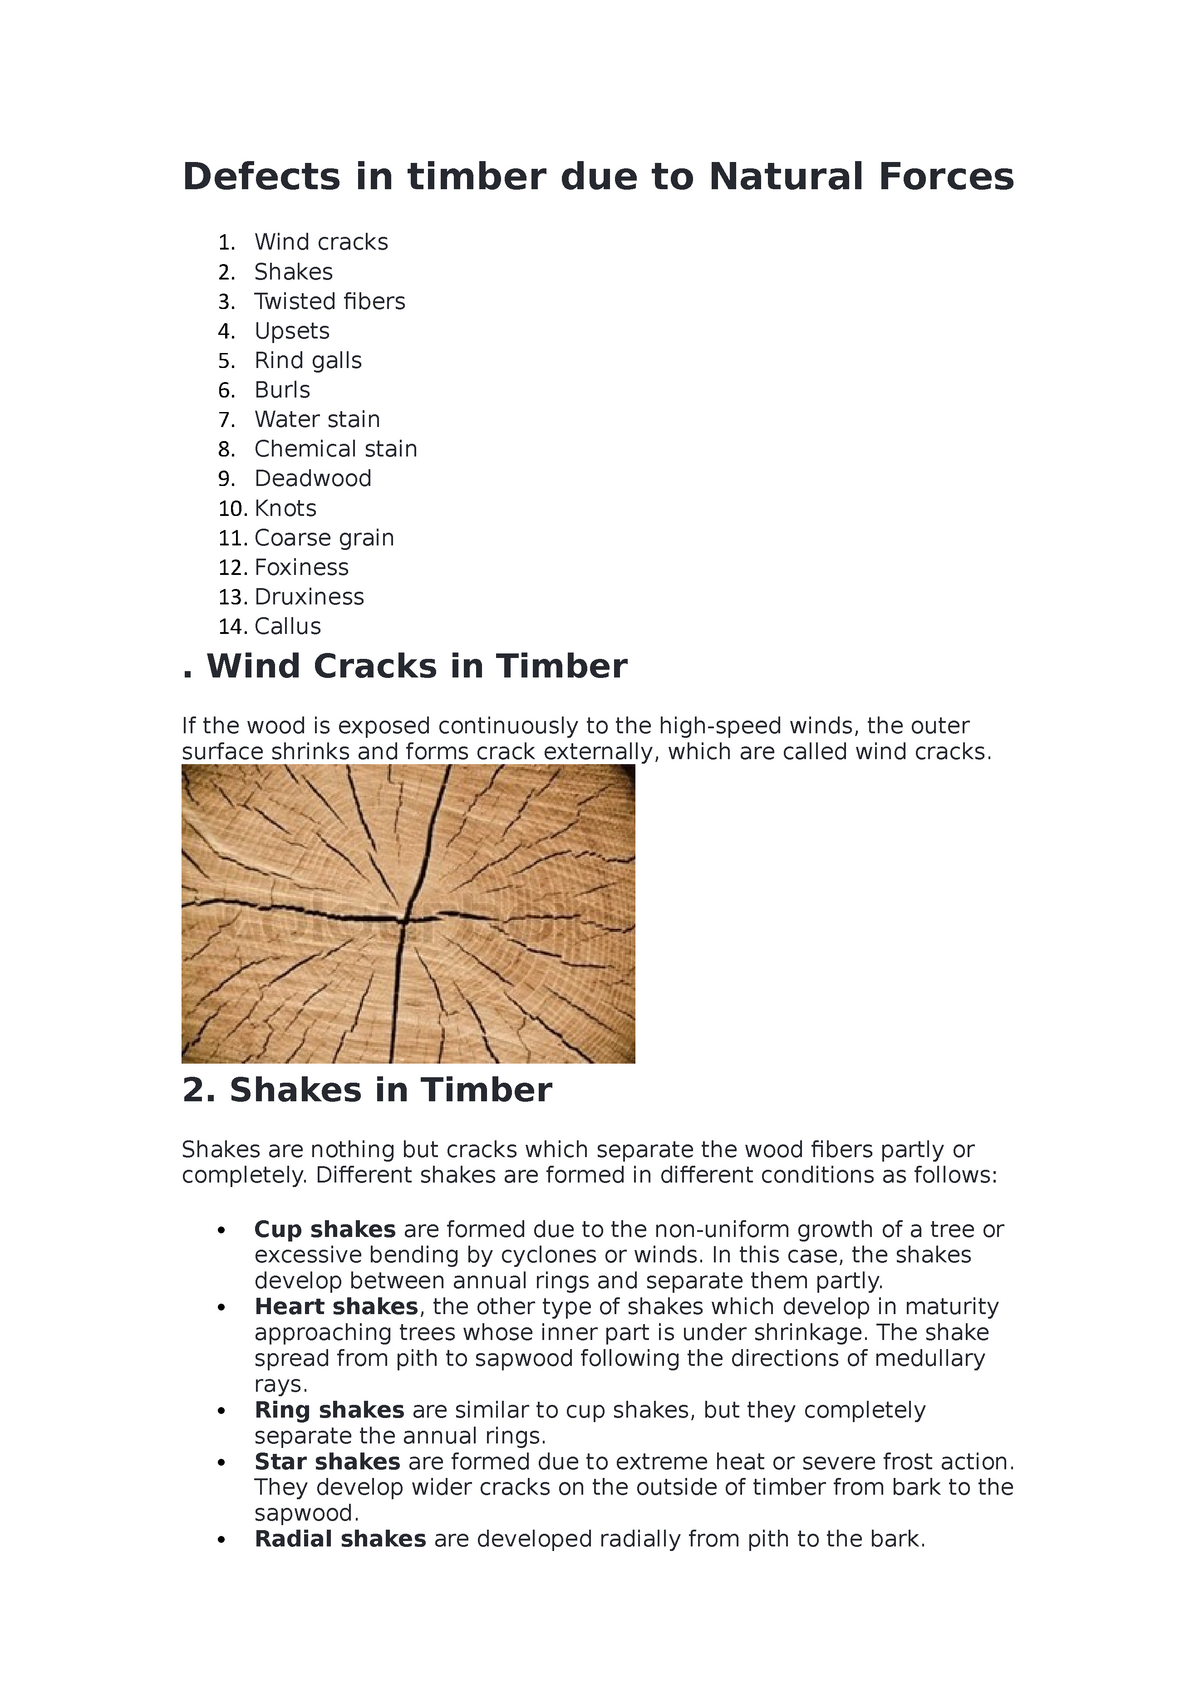 Defects in Timber | PDF | Wood | Lumber